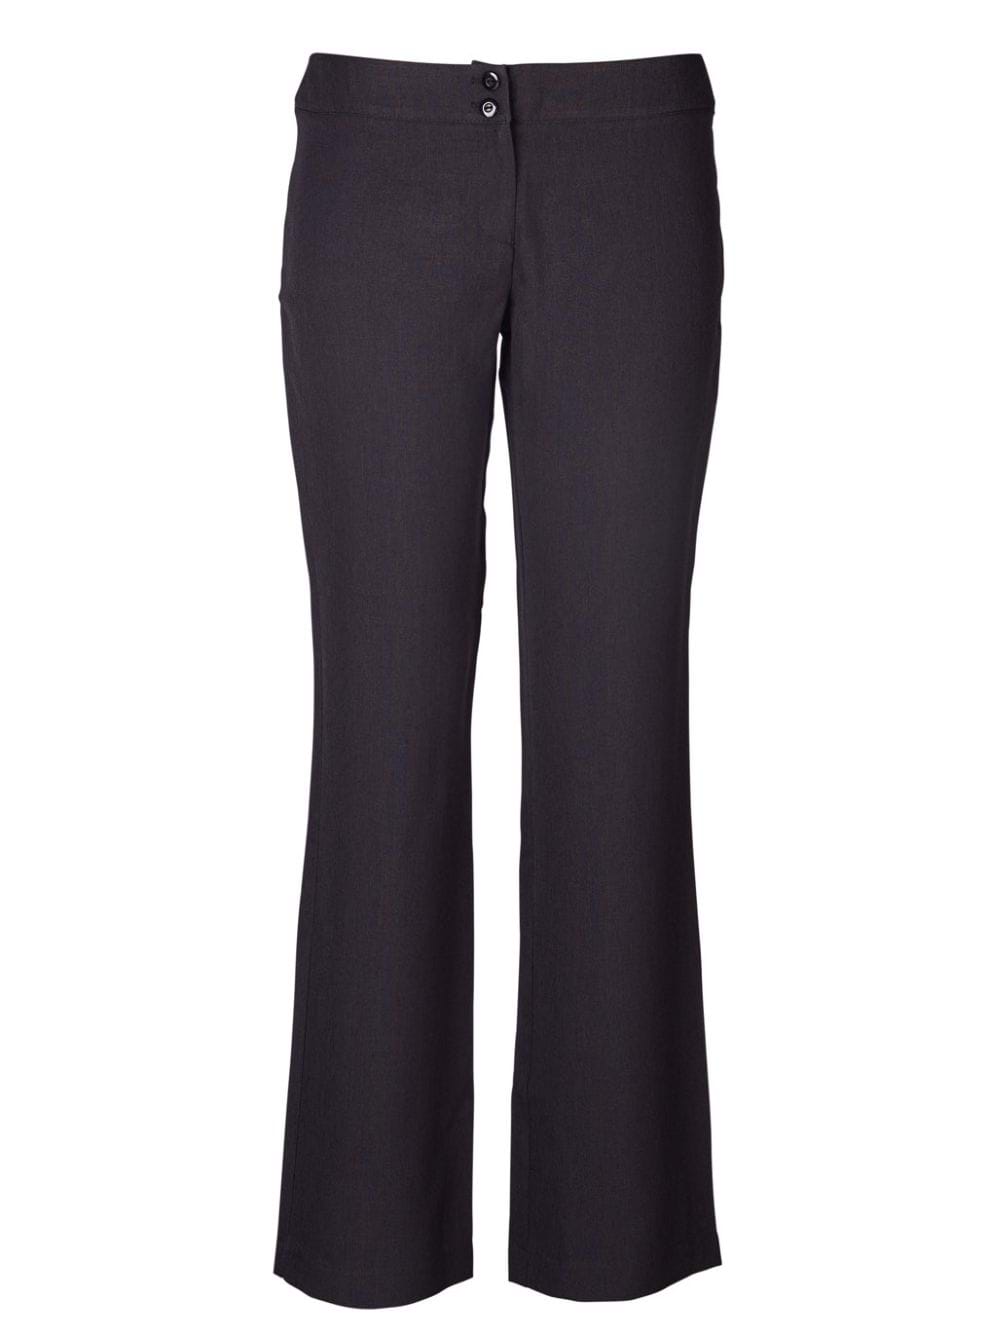 Susan Hipster Pants - Cationic Charcoal Grey / 46